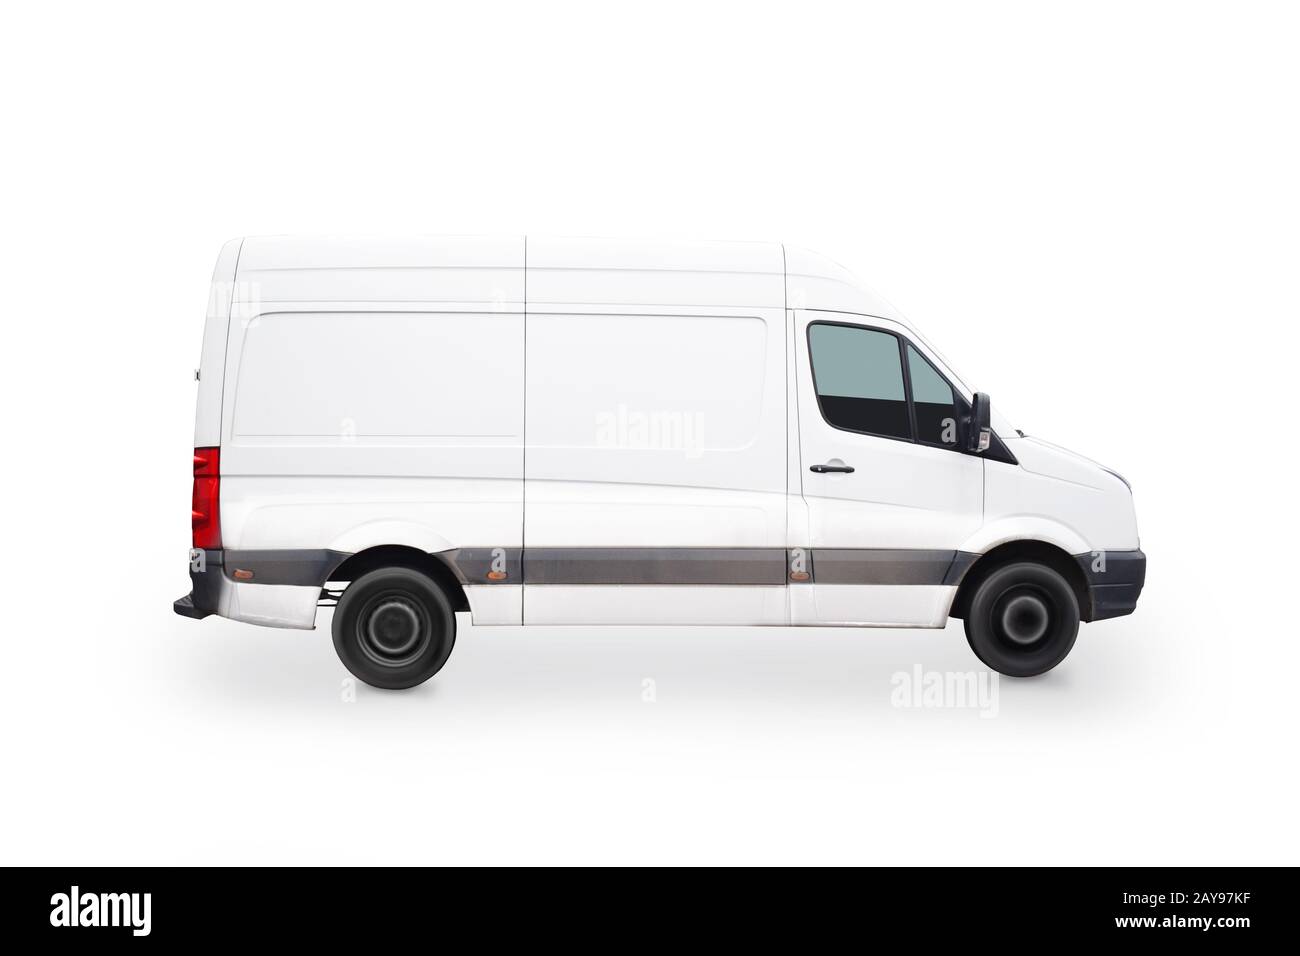 White Van Side High Resolution Stock Photography and Images - Alamy